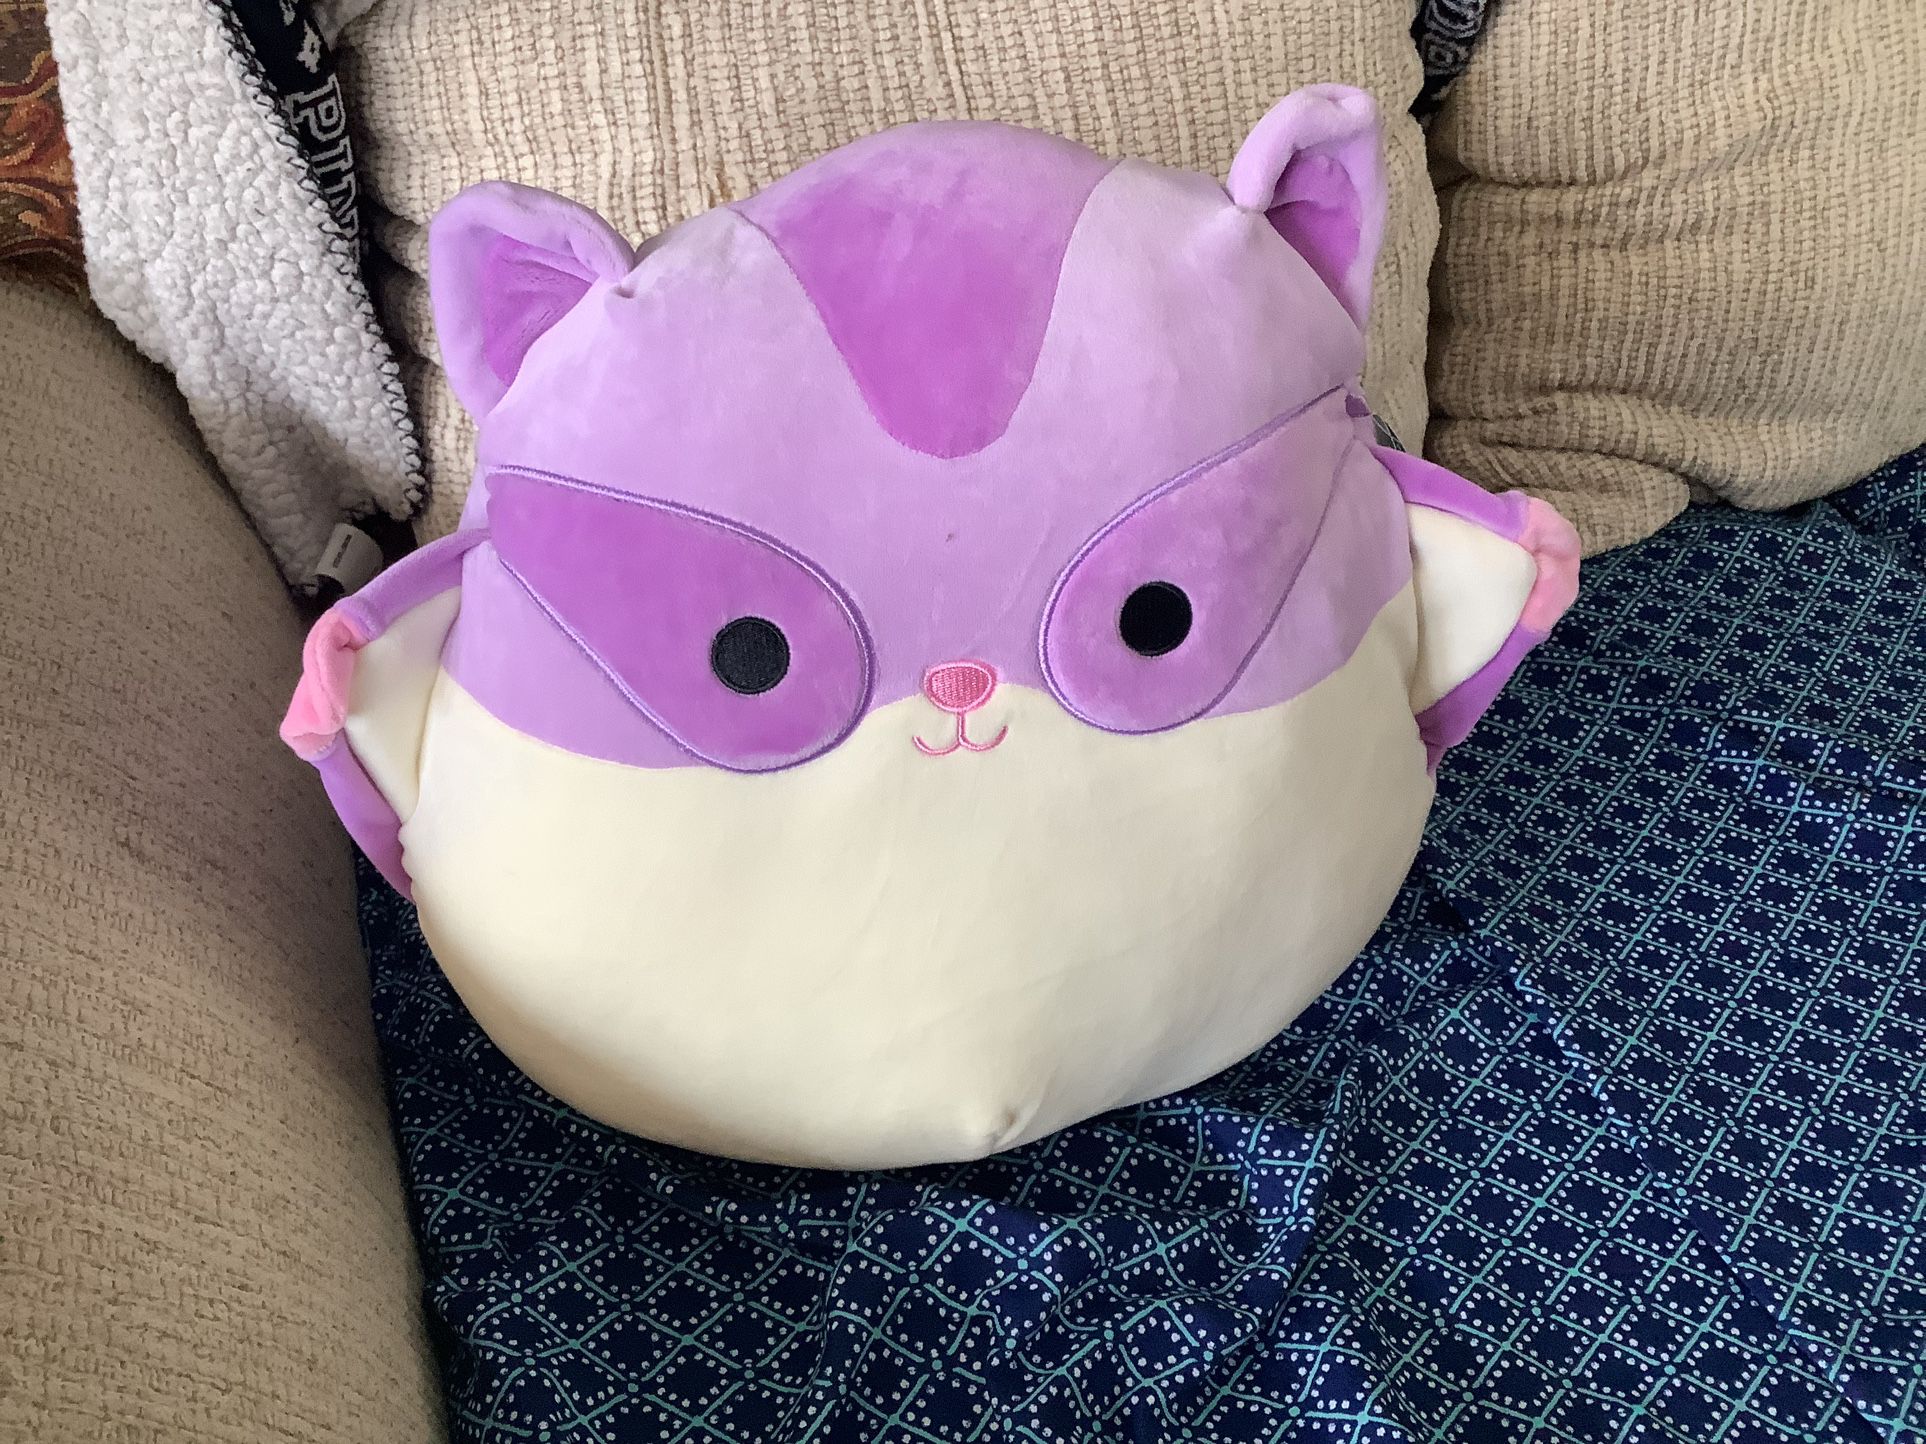 6 BAGS OF SQUISHMALLOWS 